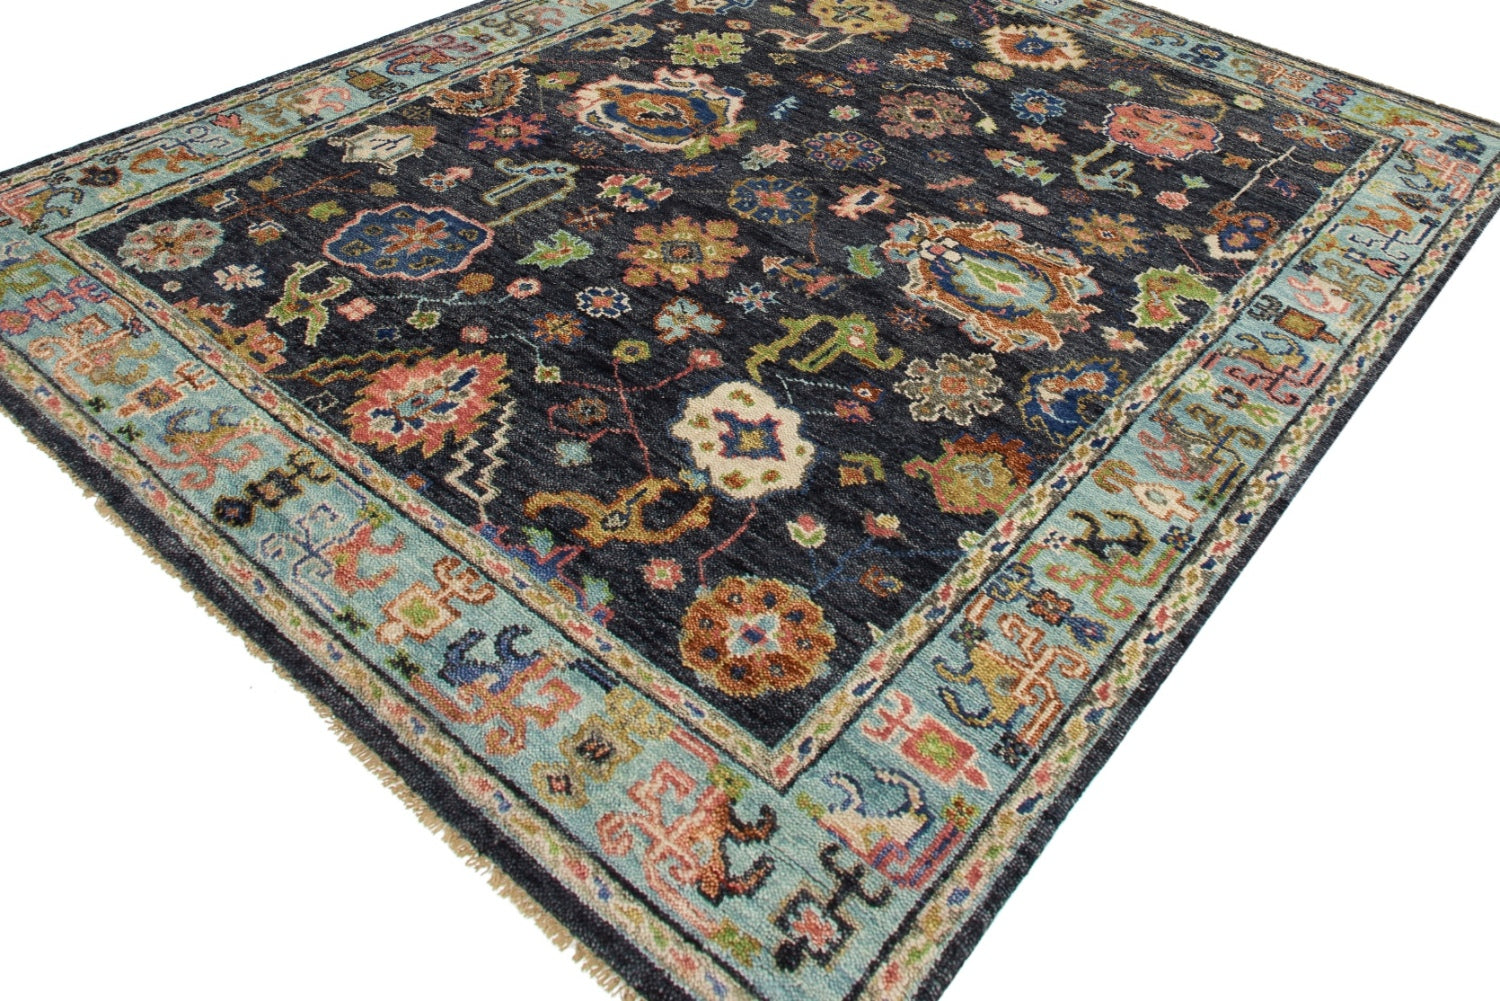 Sultanabad 4 Handwoven Traditional Rug, J71731